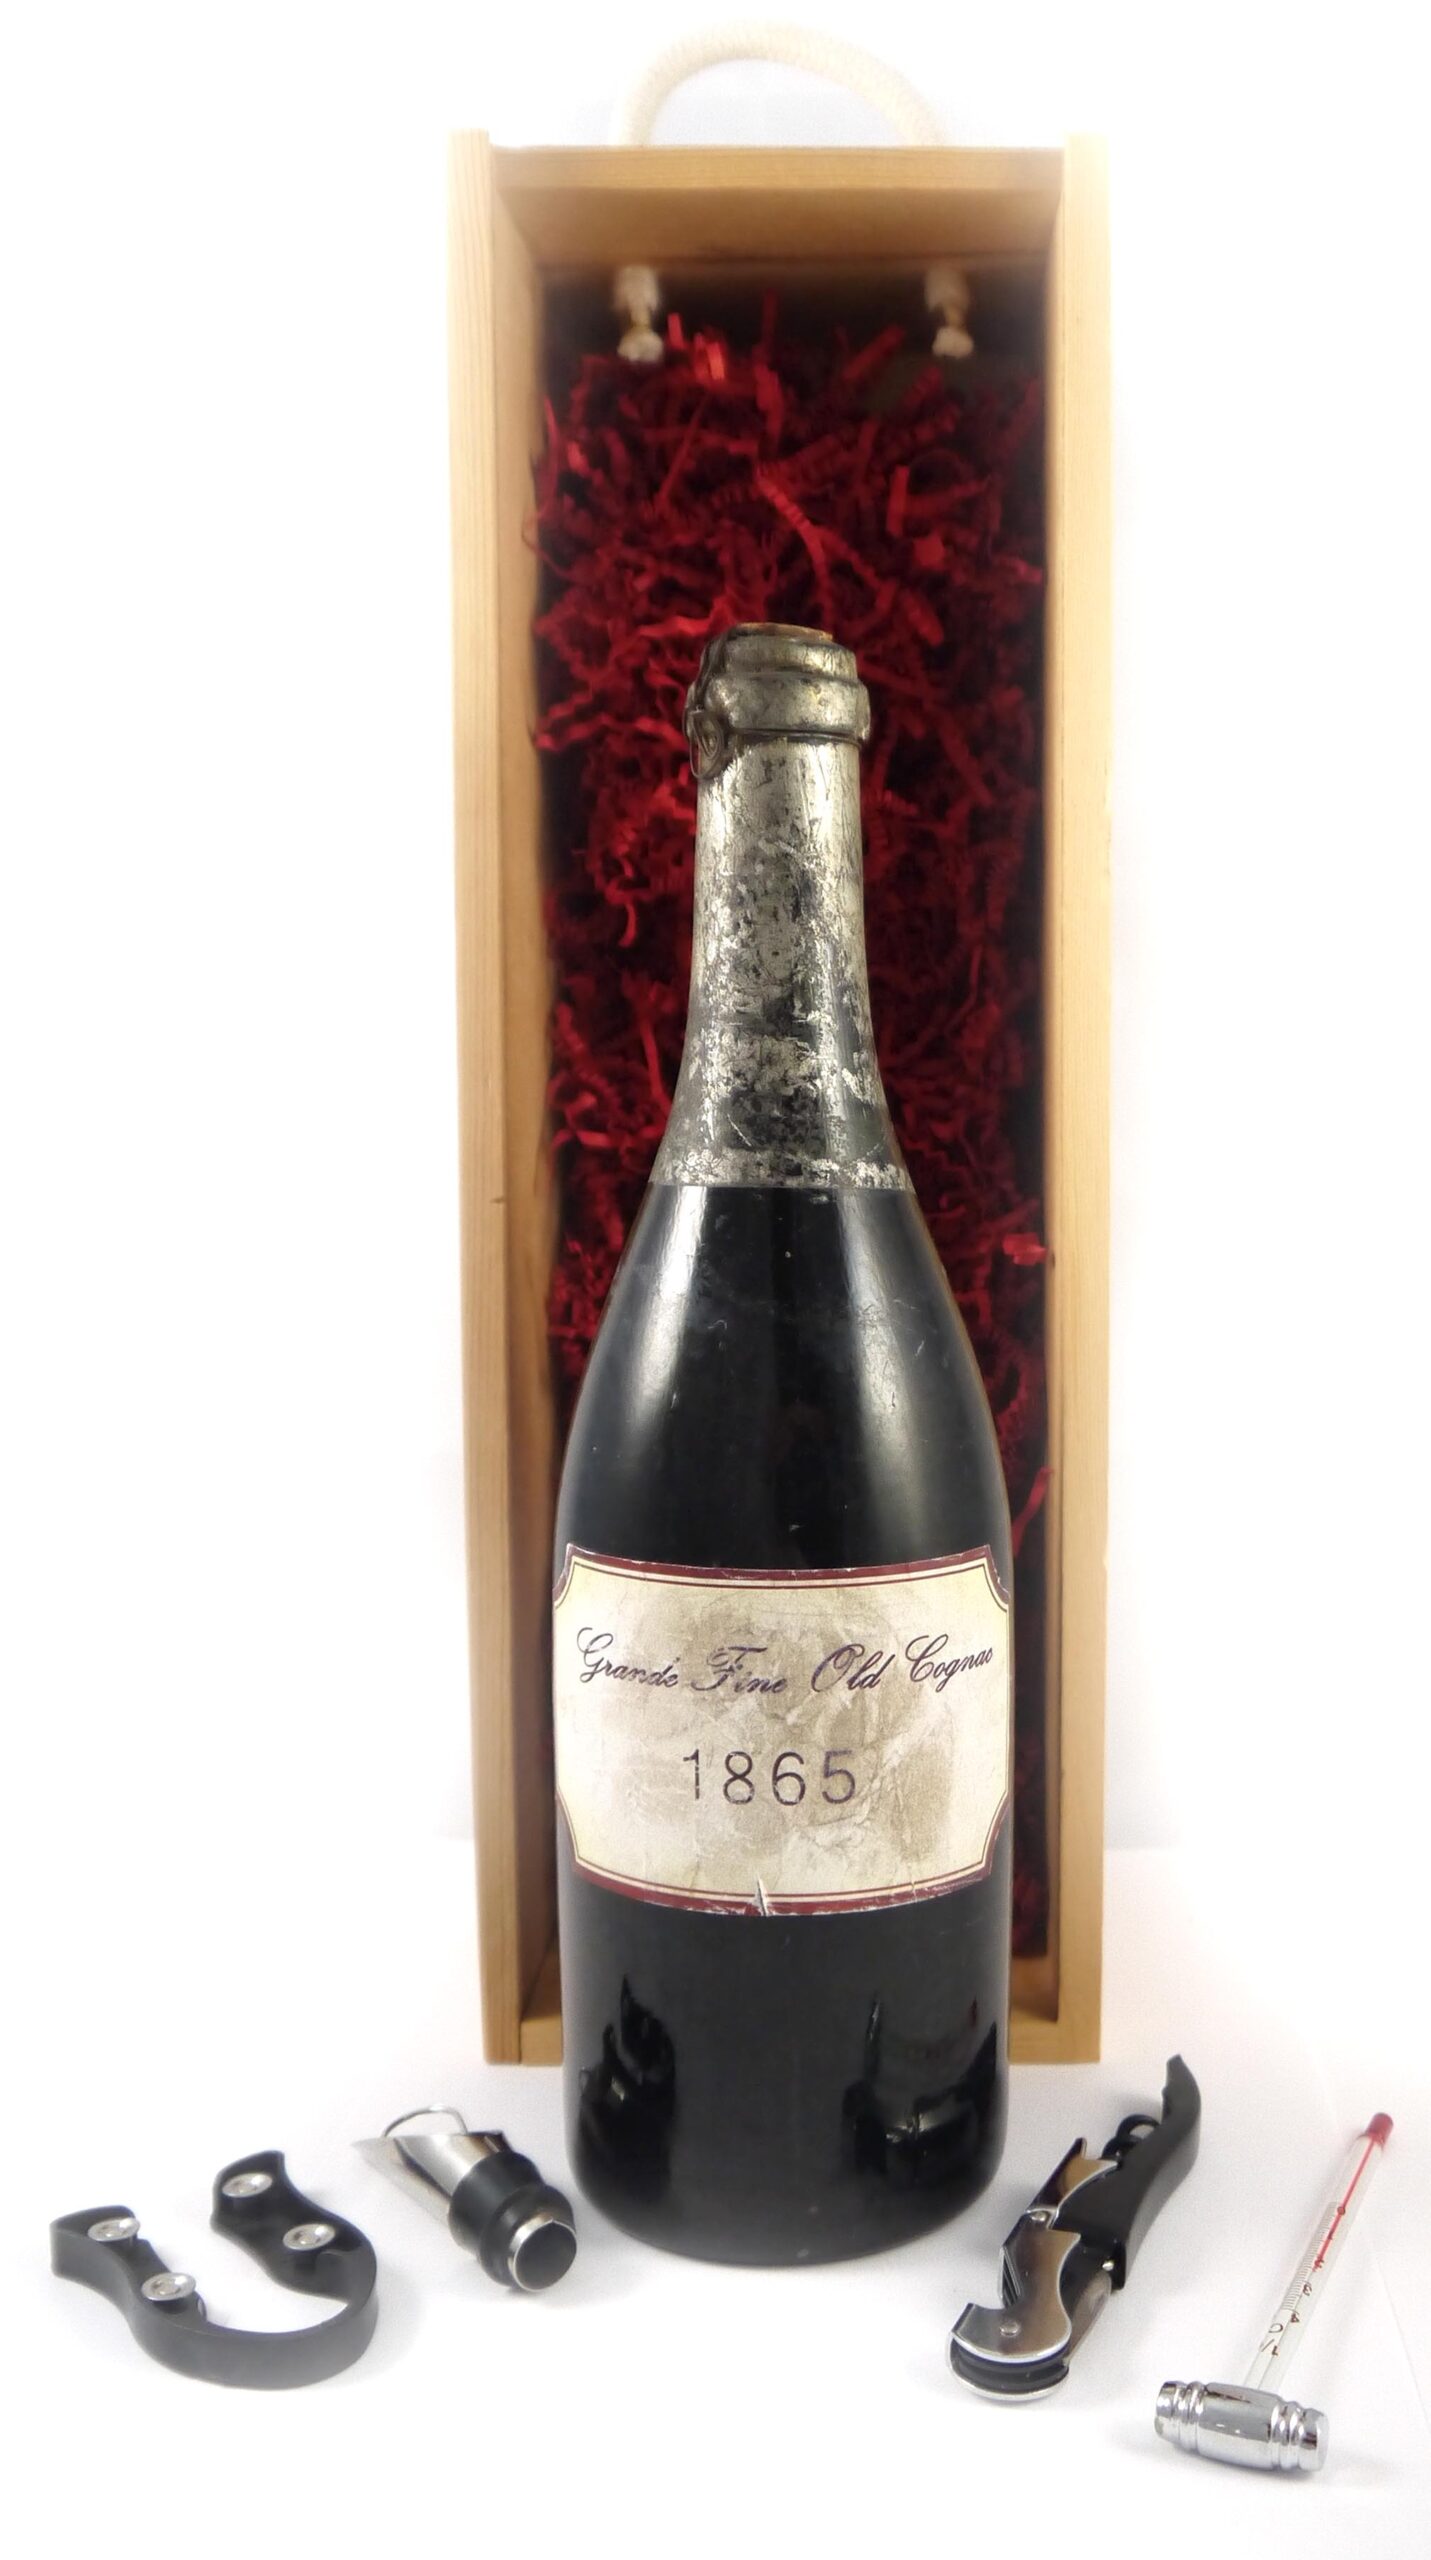 Product image of 1865 Grande Fine Old Cognac 1865 (70cl) from Vintage Wine Gifts